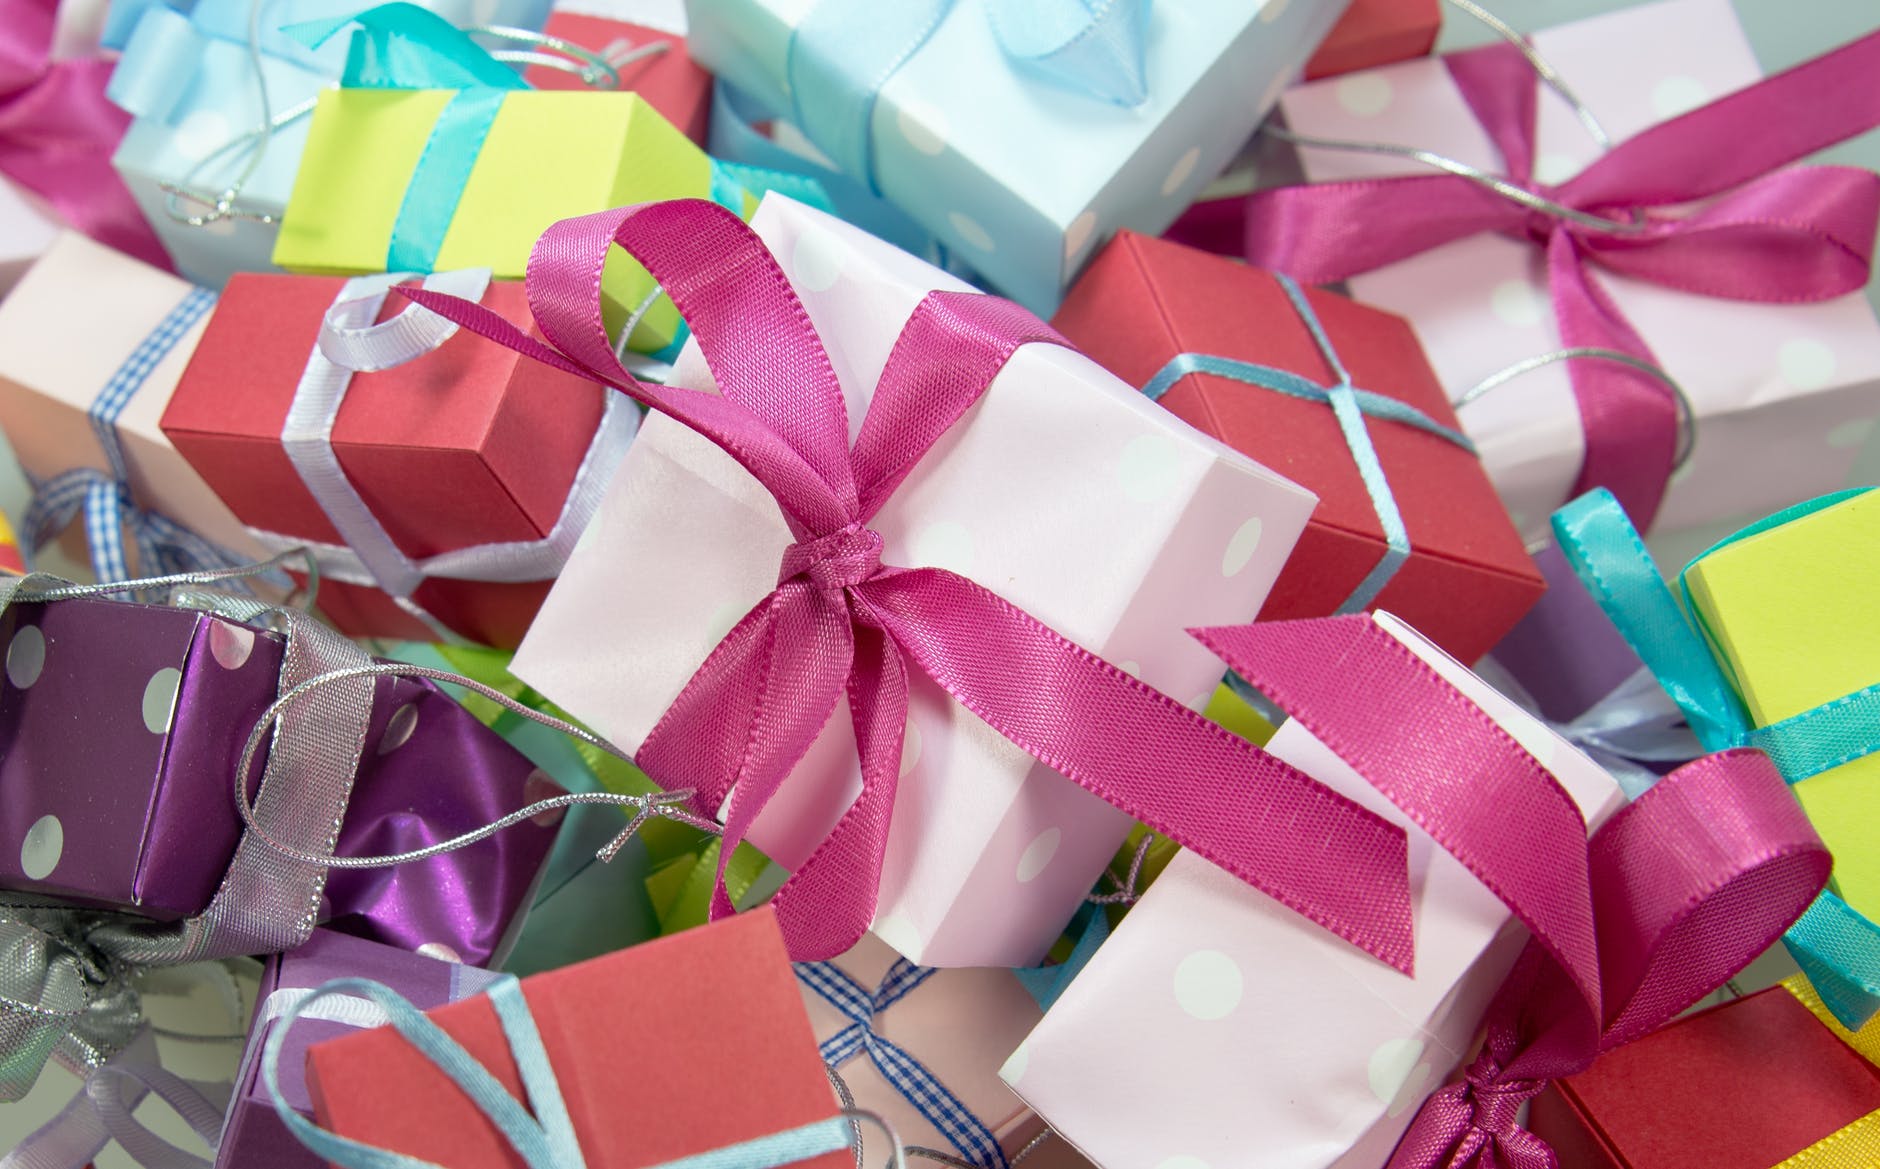 Four tips on what you must avoid gifting to your boyfriend